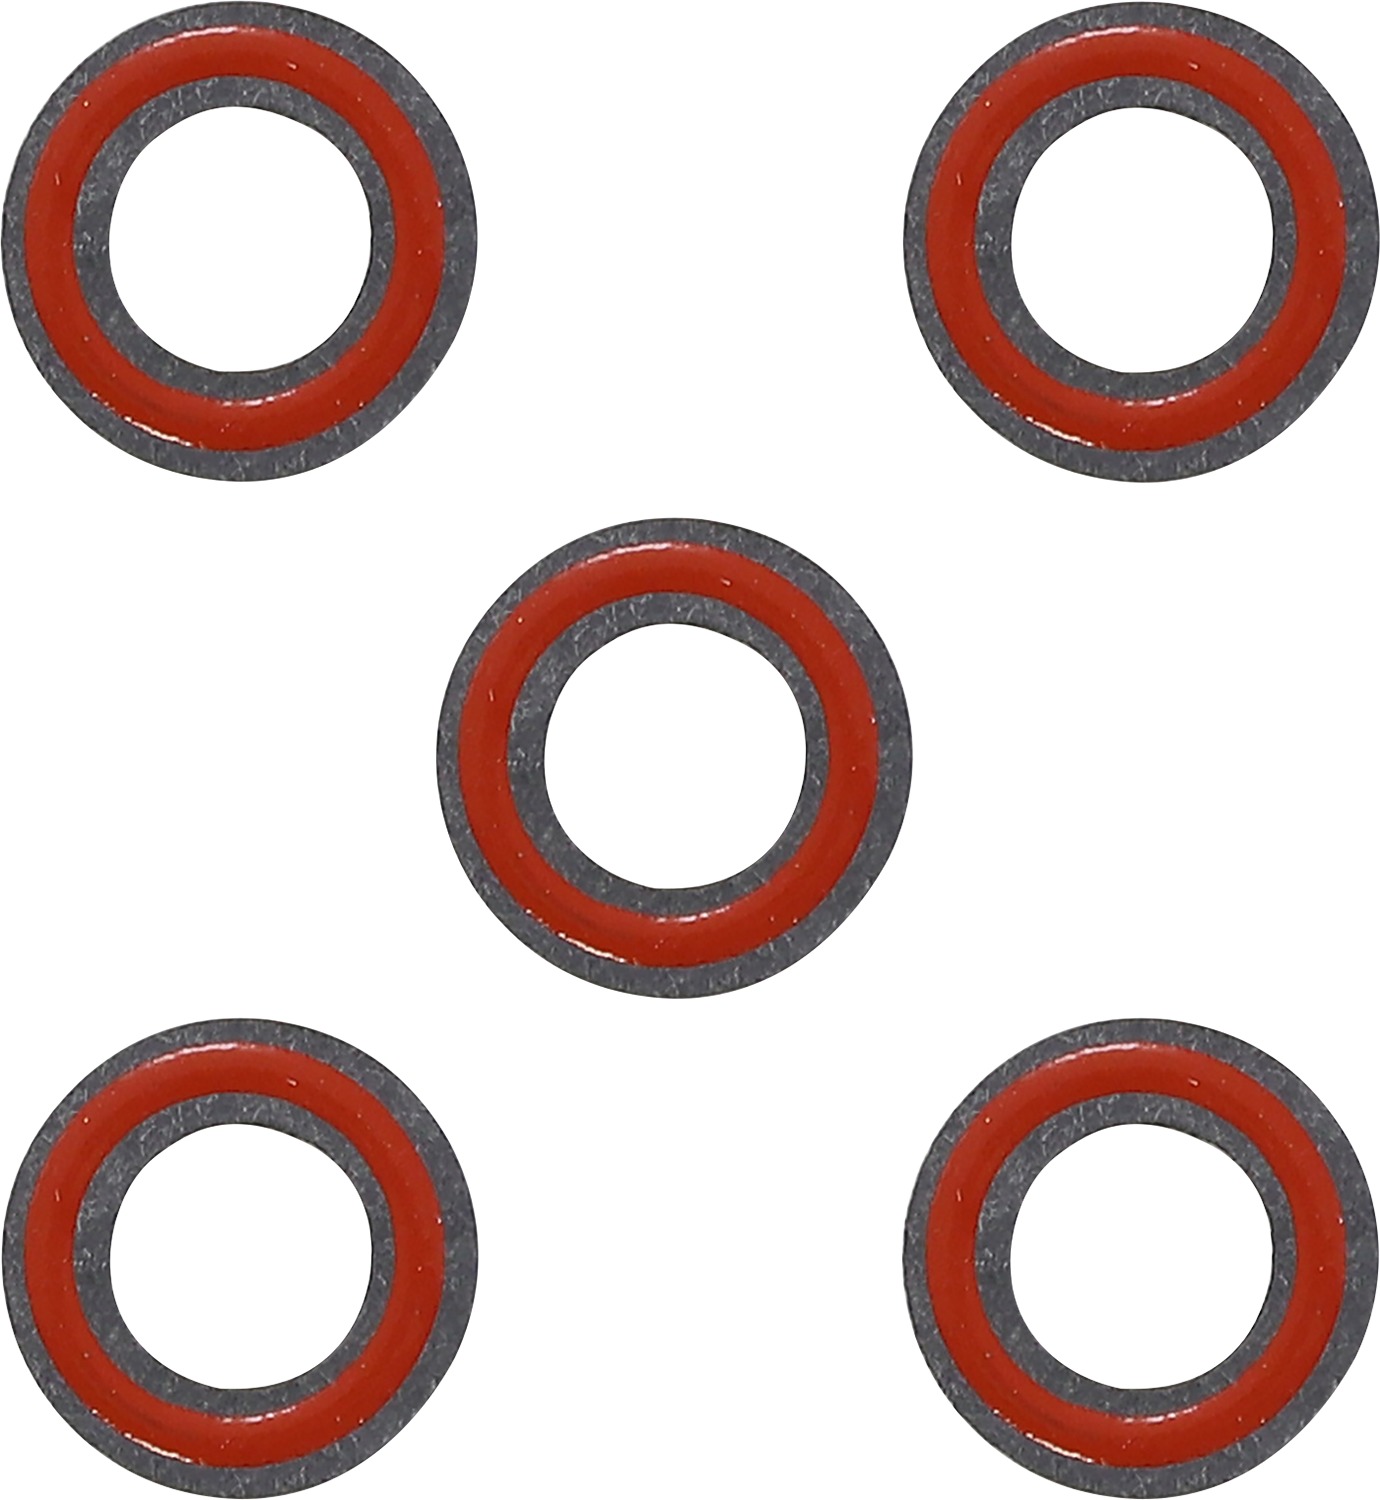 Shift Boss Gasket Replaces 63869-06 For 06-17 Dyna Twin Cam - 5 Pack - Click Image to Close